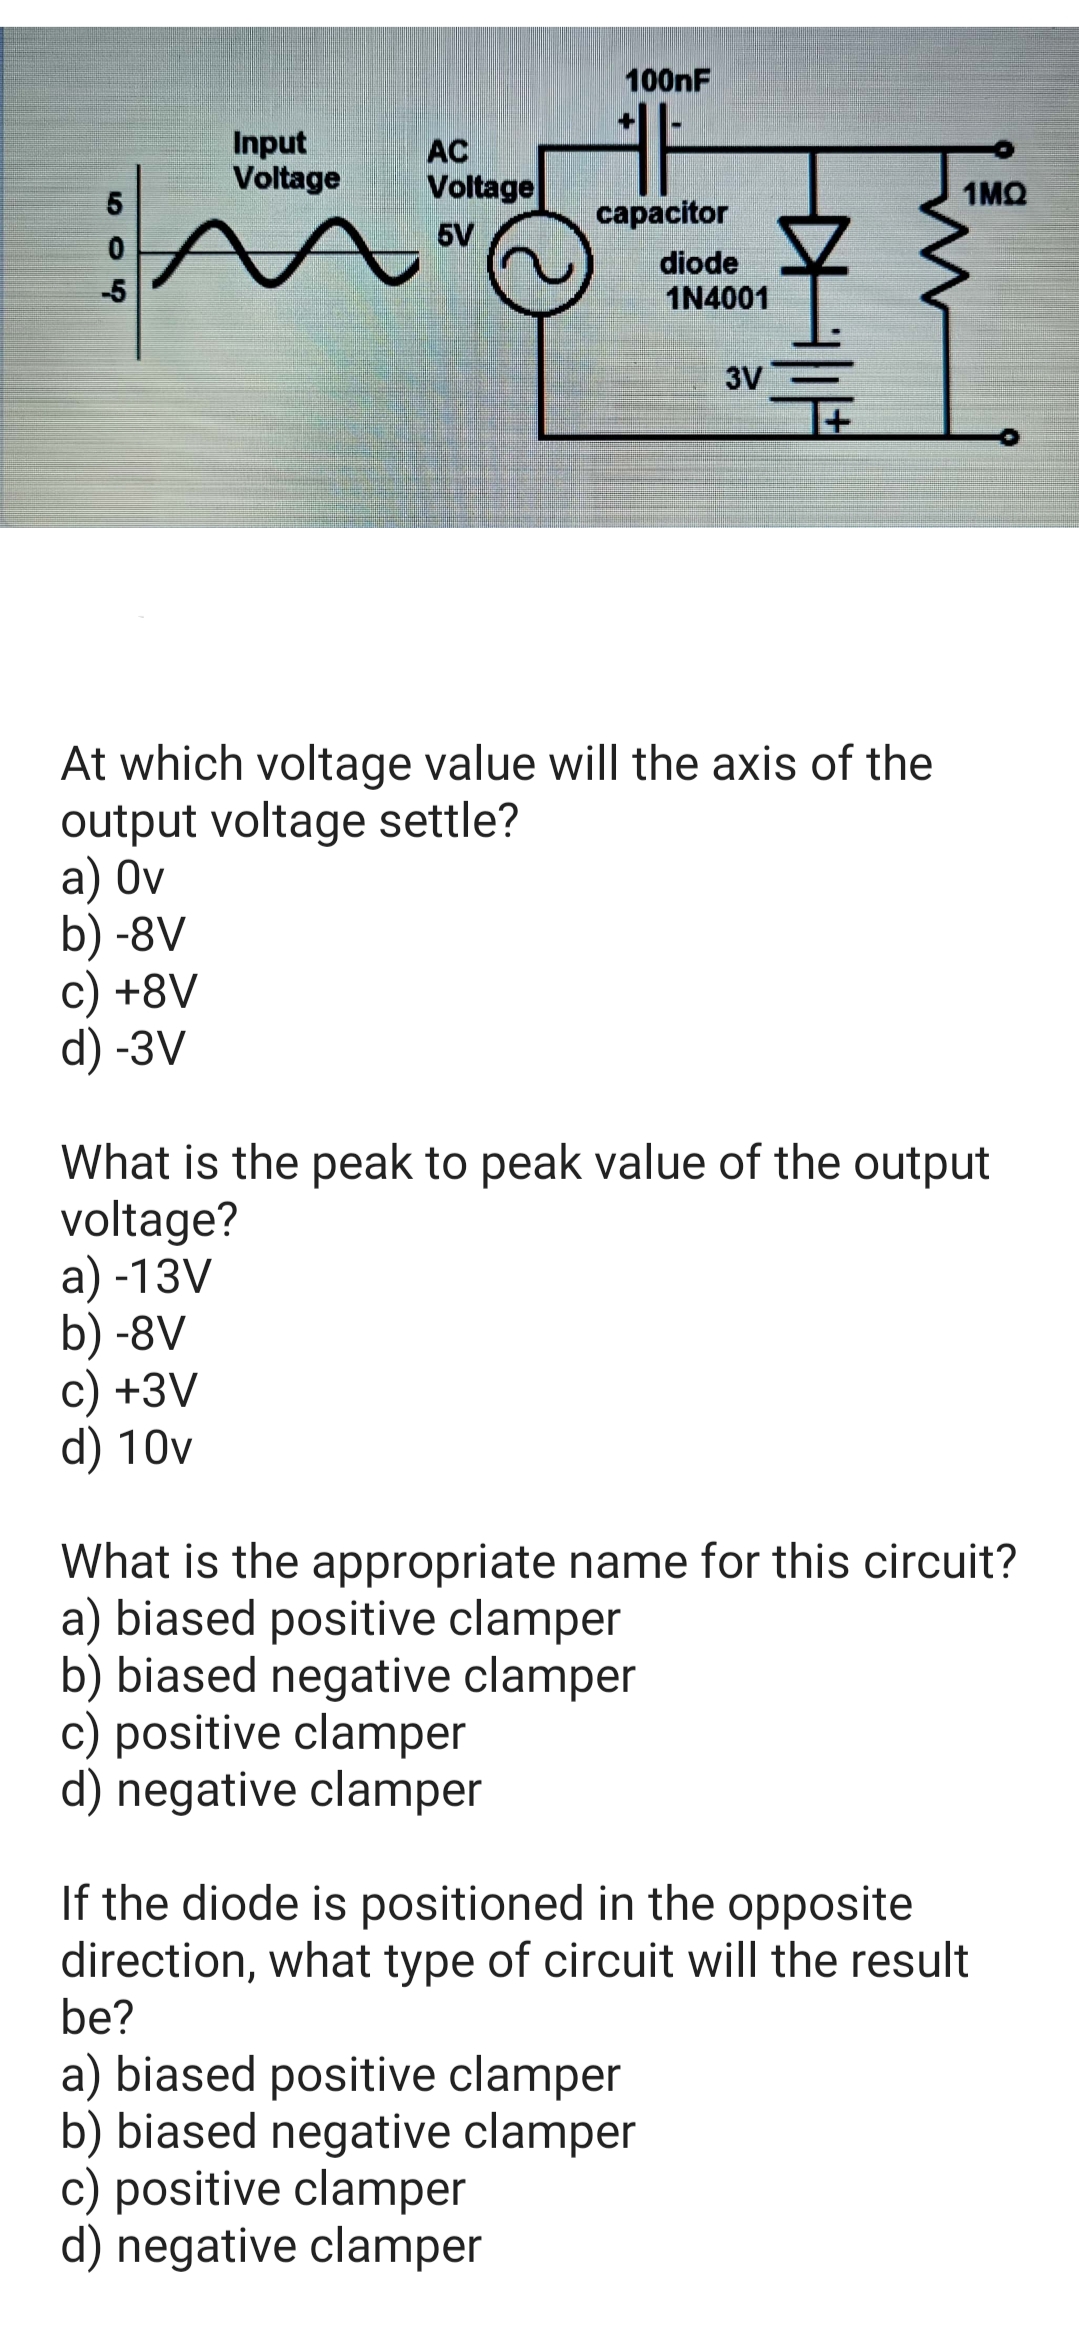 100nF
Input
Voltage
AC
Voltage
1MQ
capacitor
5V
diode
1N4001
-5
3V
At which voltage value will the axis of the
output voltage settle?
а) Ov
b) -8V
c) +8V
d) -3V
What is the peak to peak value of the output
voltage?
a) -13V
b) -8V
c) +3V
d) 10v
What is the appropriate name for this circuit?
a) biased positive clamper
b) biased negative clamper
c) positive clamper
d) negative clamper
If the diode is positioned in the opposite
direction, what type of circuit will the result
be?
a) biased positive clamper
b) biased negative clamper
c) positive clamper
d) negative clamper
